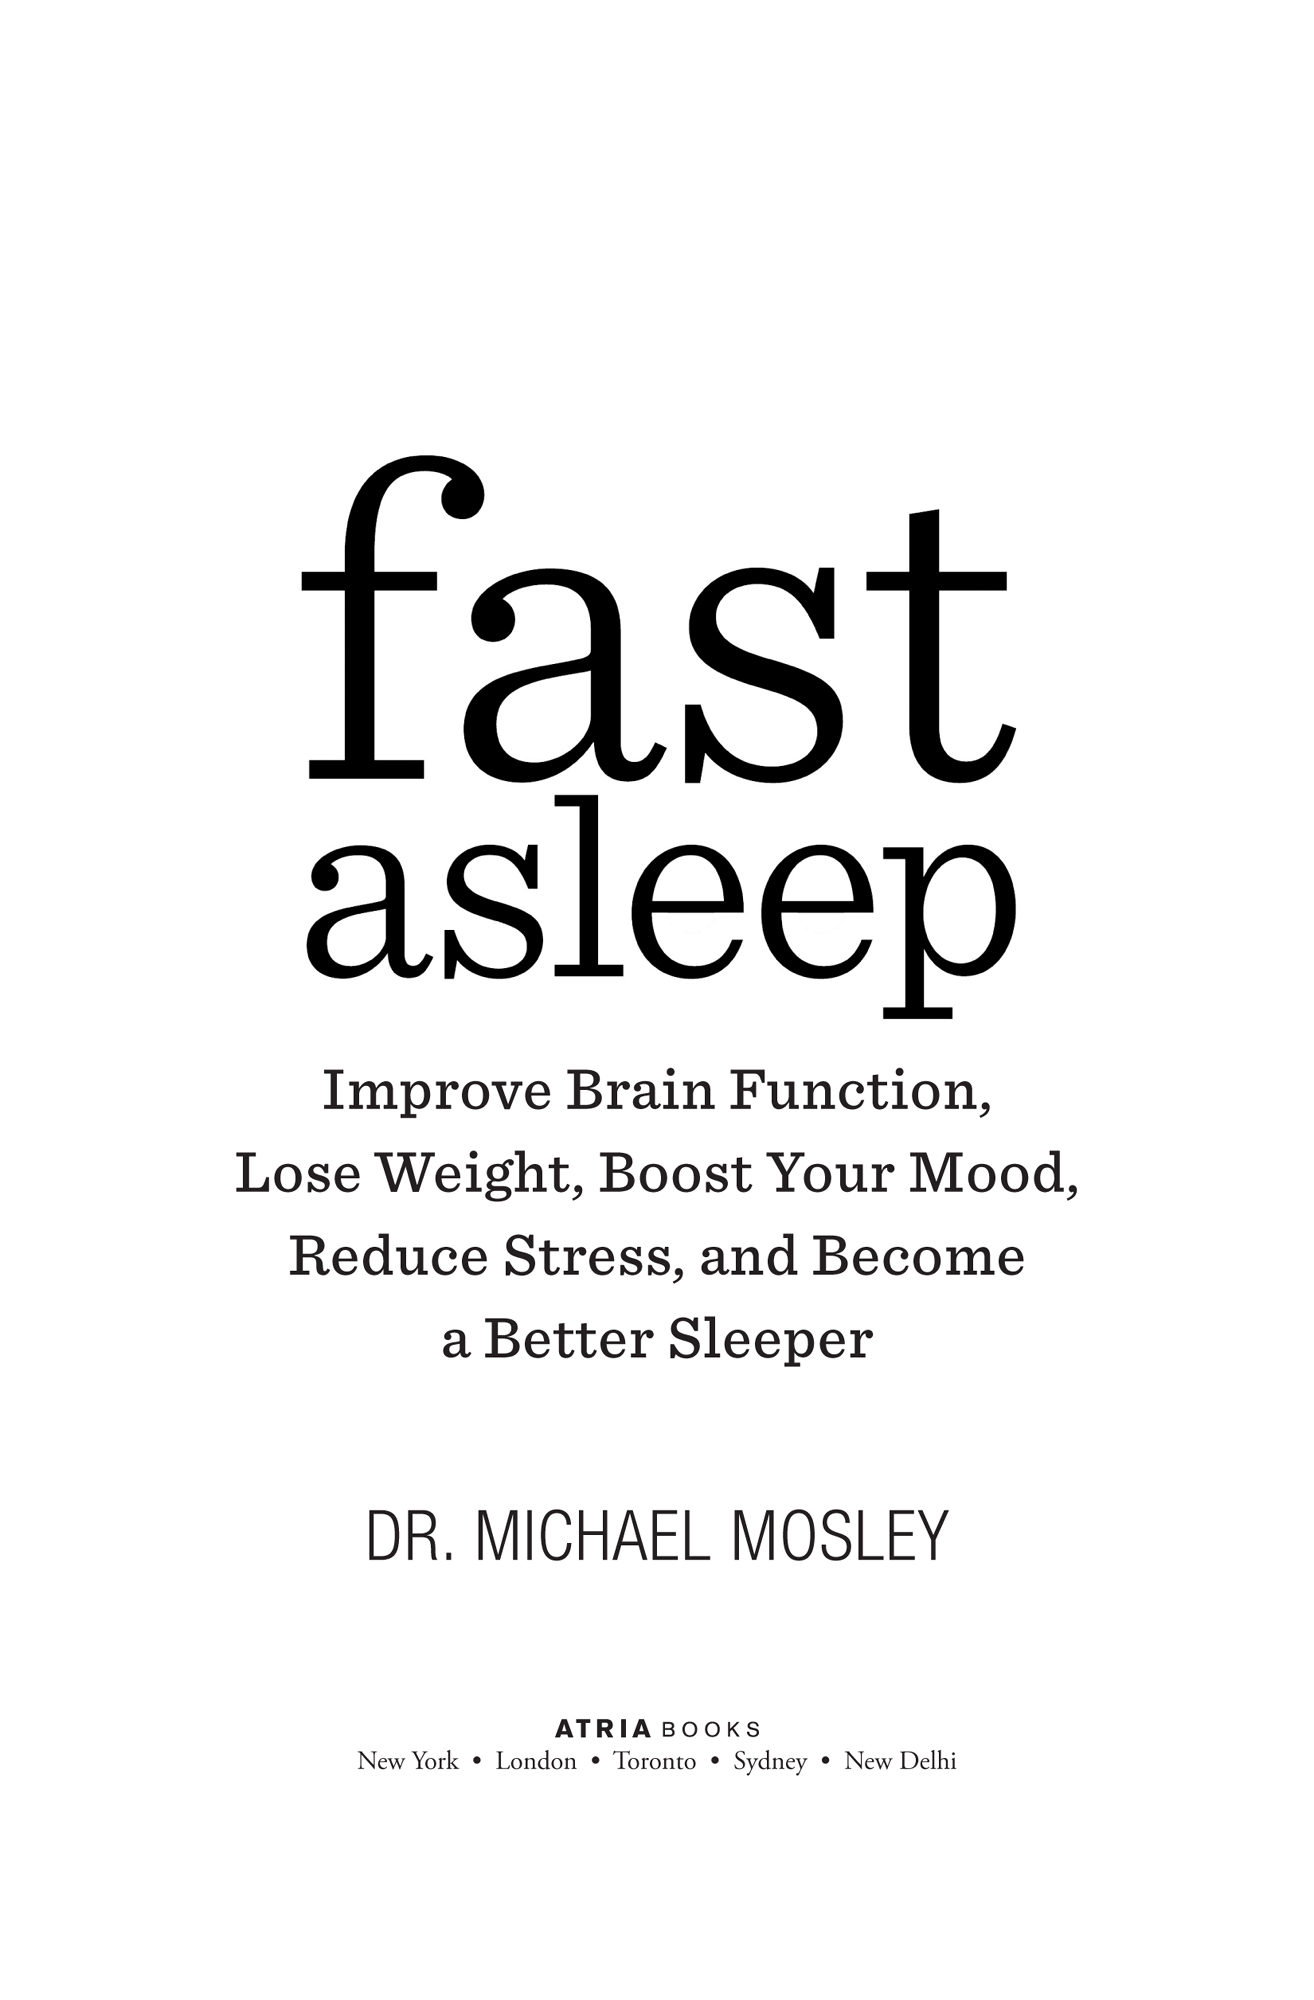 Fast Asleep Improve Brain Function Lose Weight Boost Your Mood Reduce Stress and Become a Better Sleeper - image 2